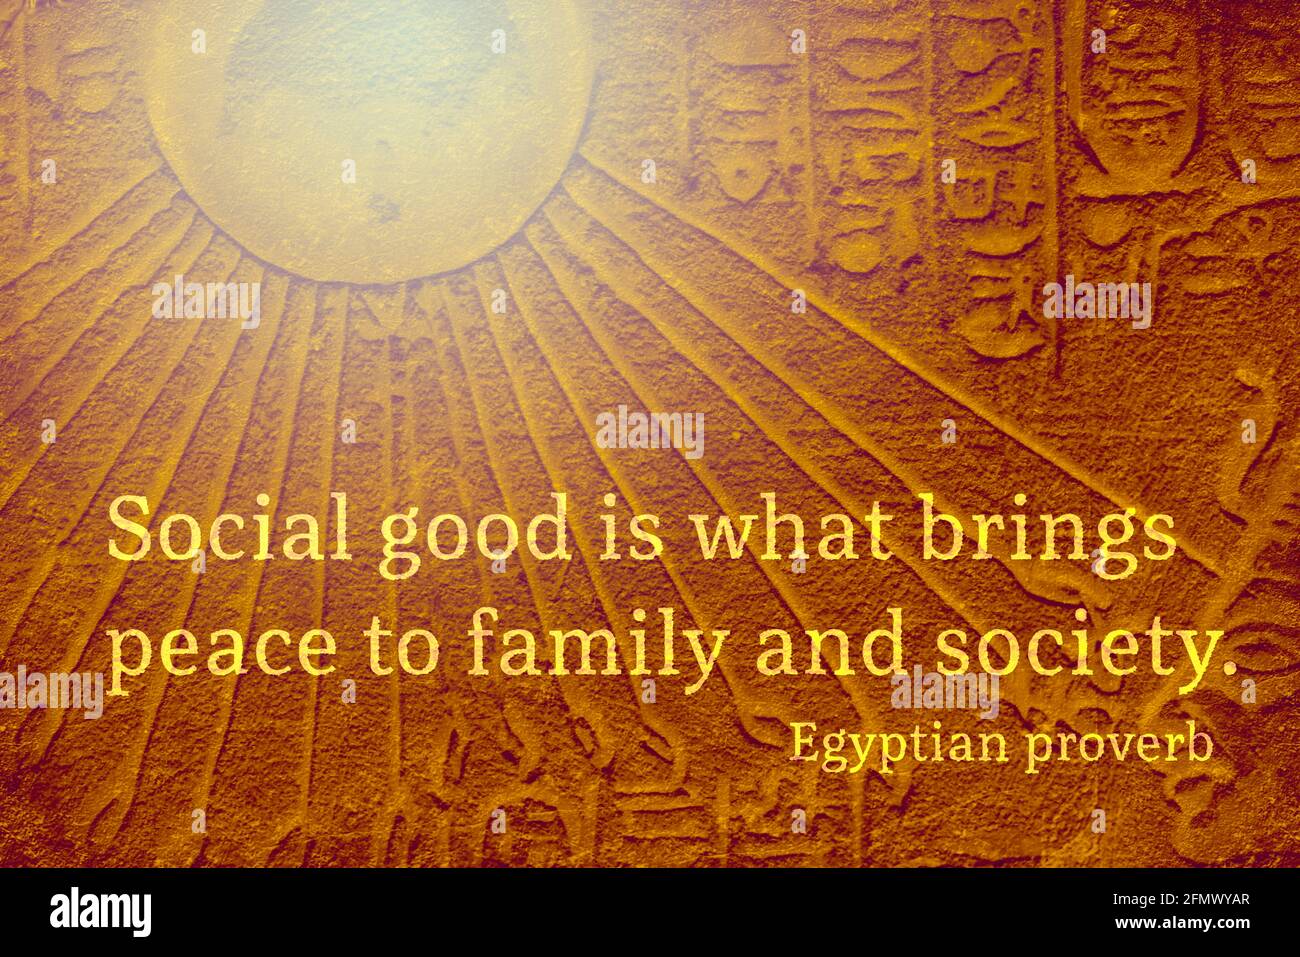 Social Good Is What Brings Peace To Family And Society Ancient Egyptian Proverb Citation Stock Photo Alamy